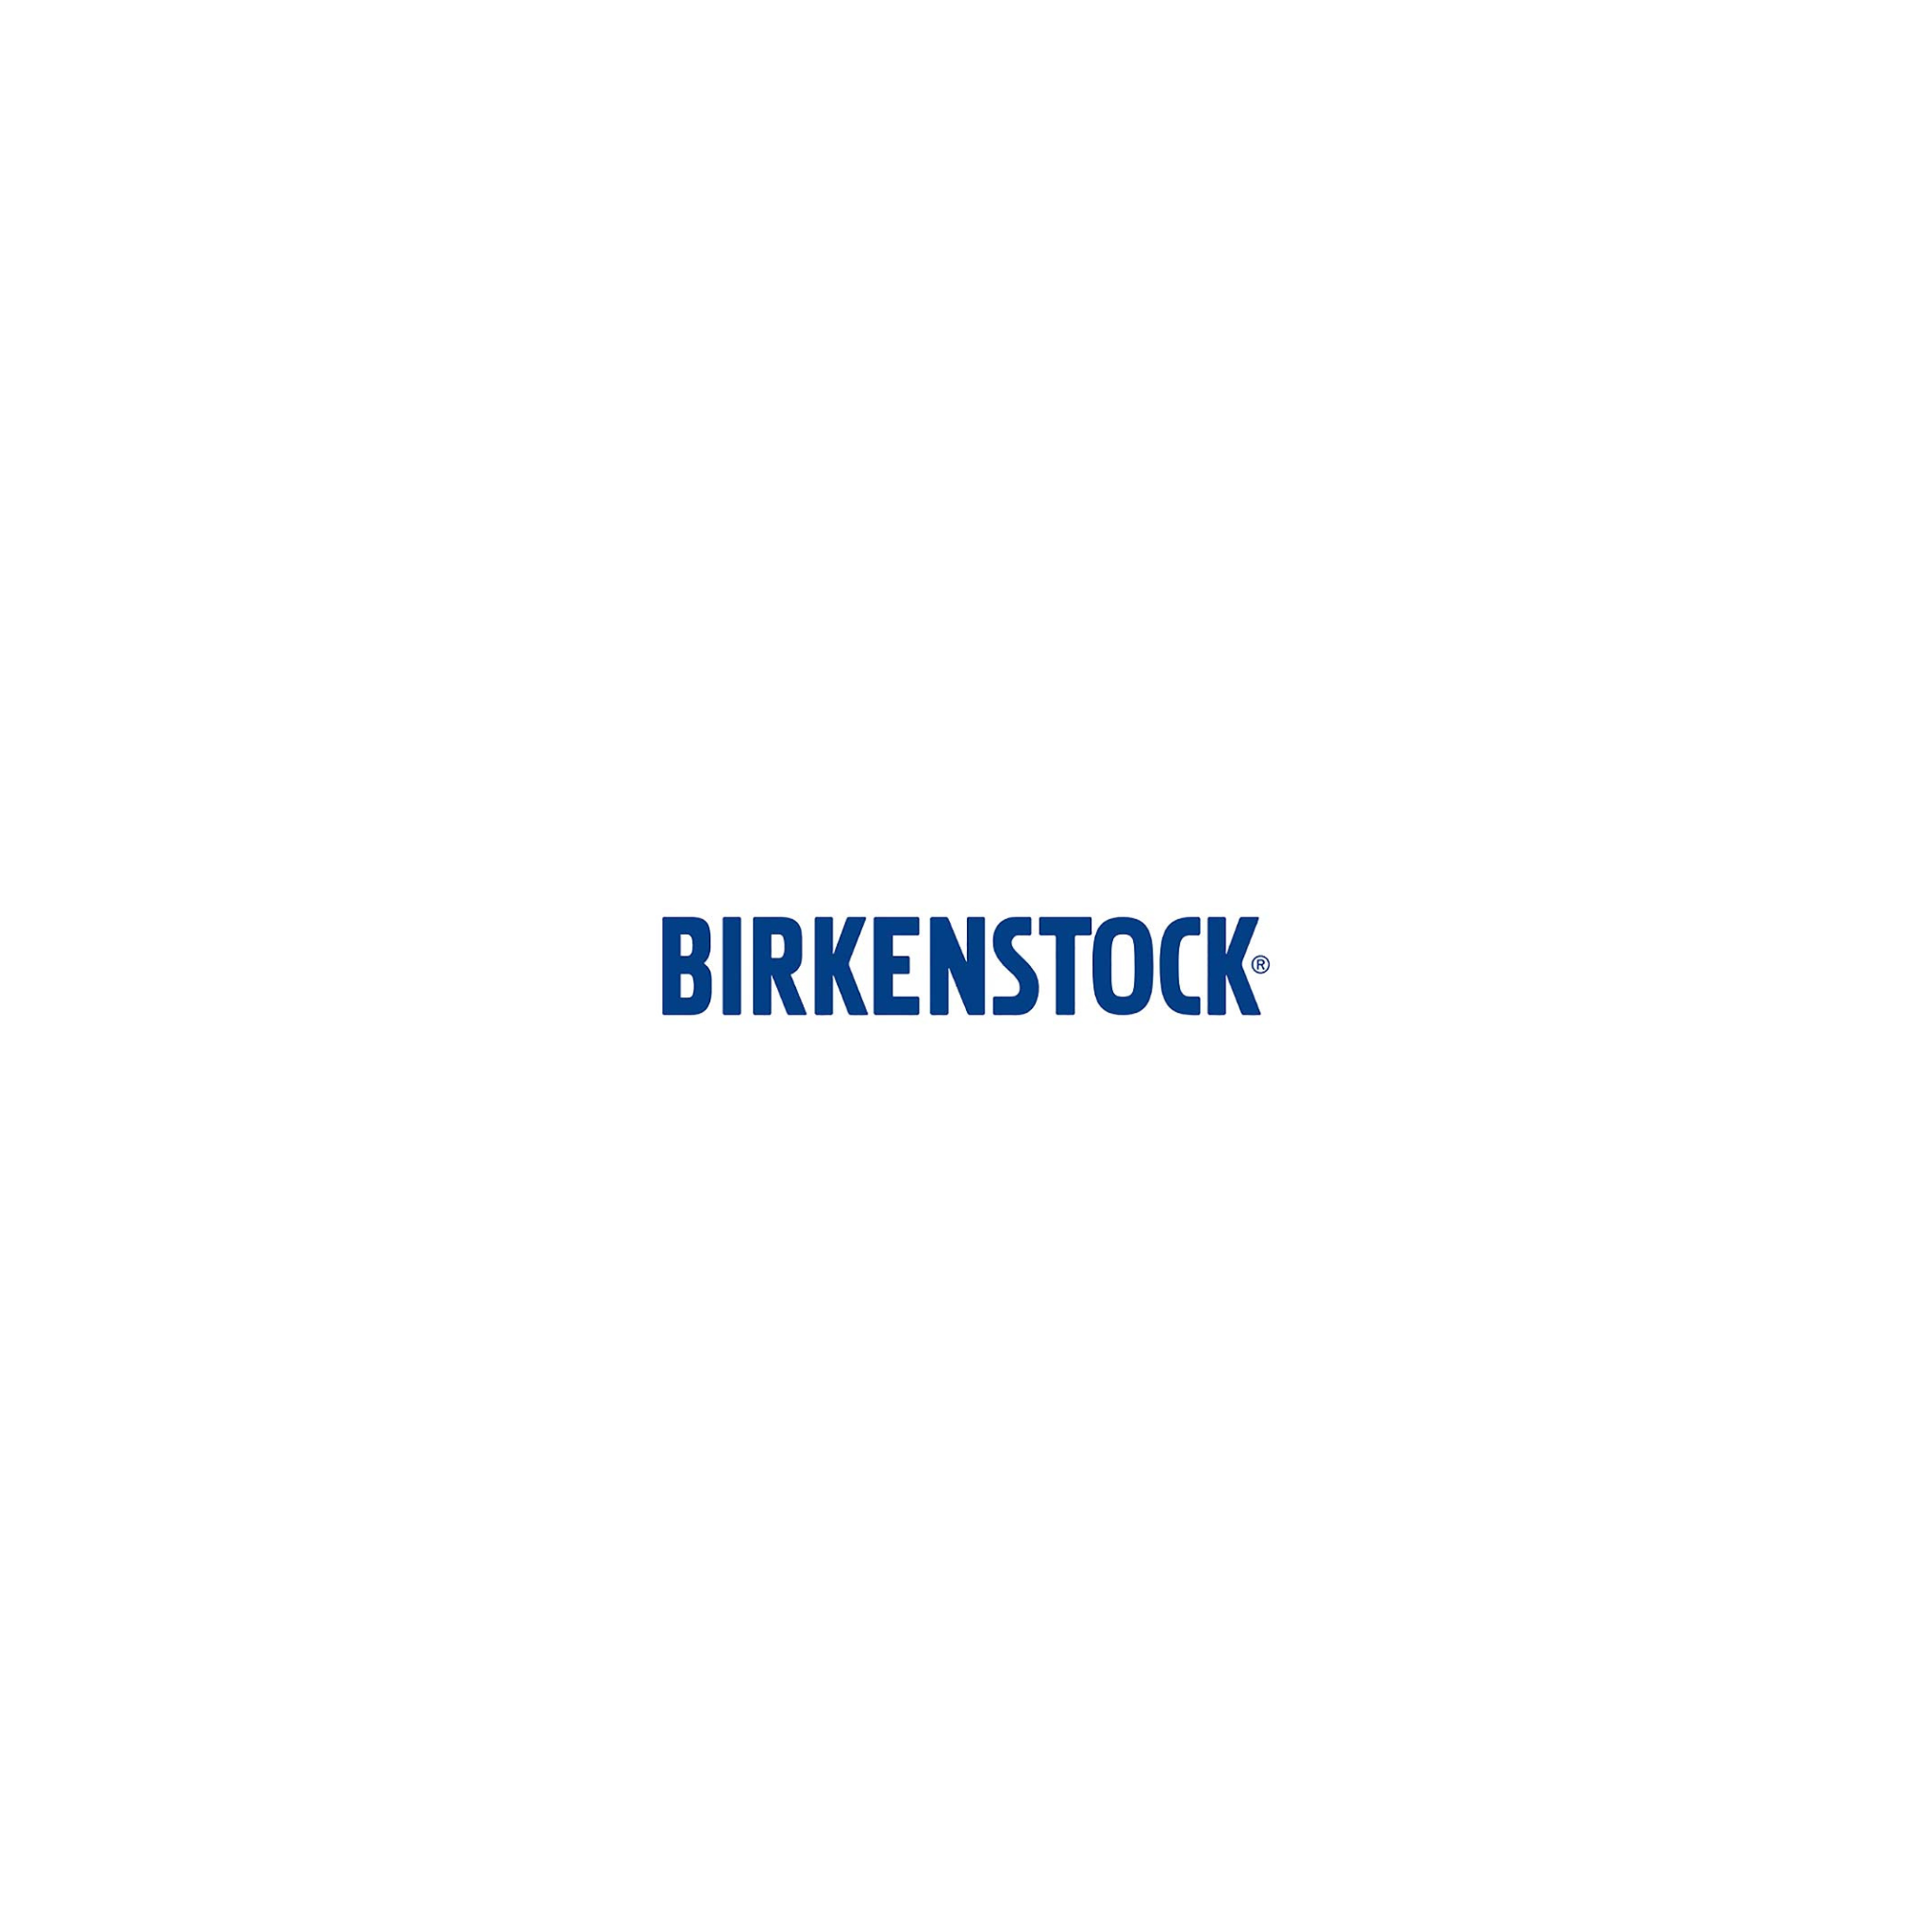 Birkenstock Collection Cover Image